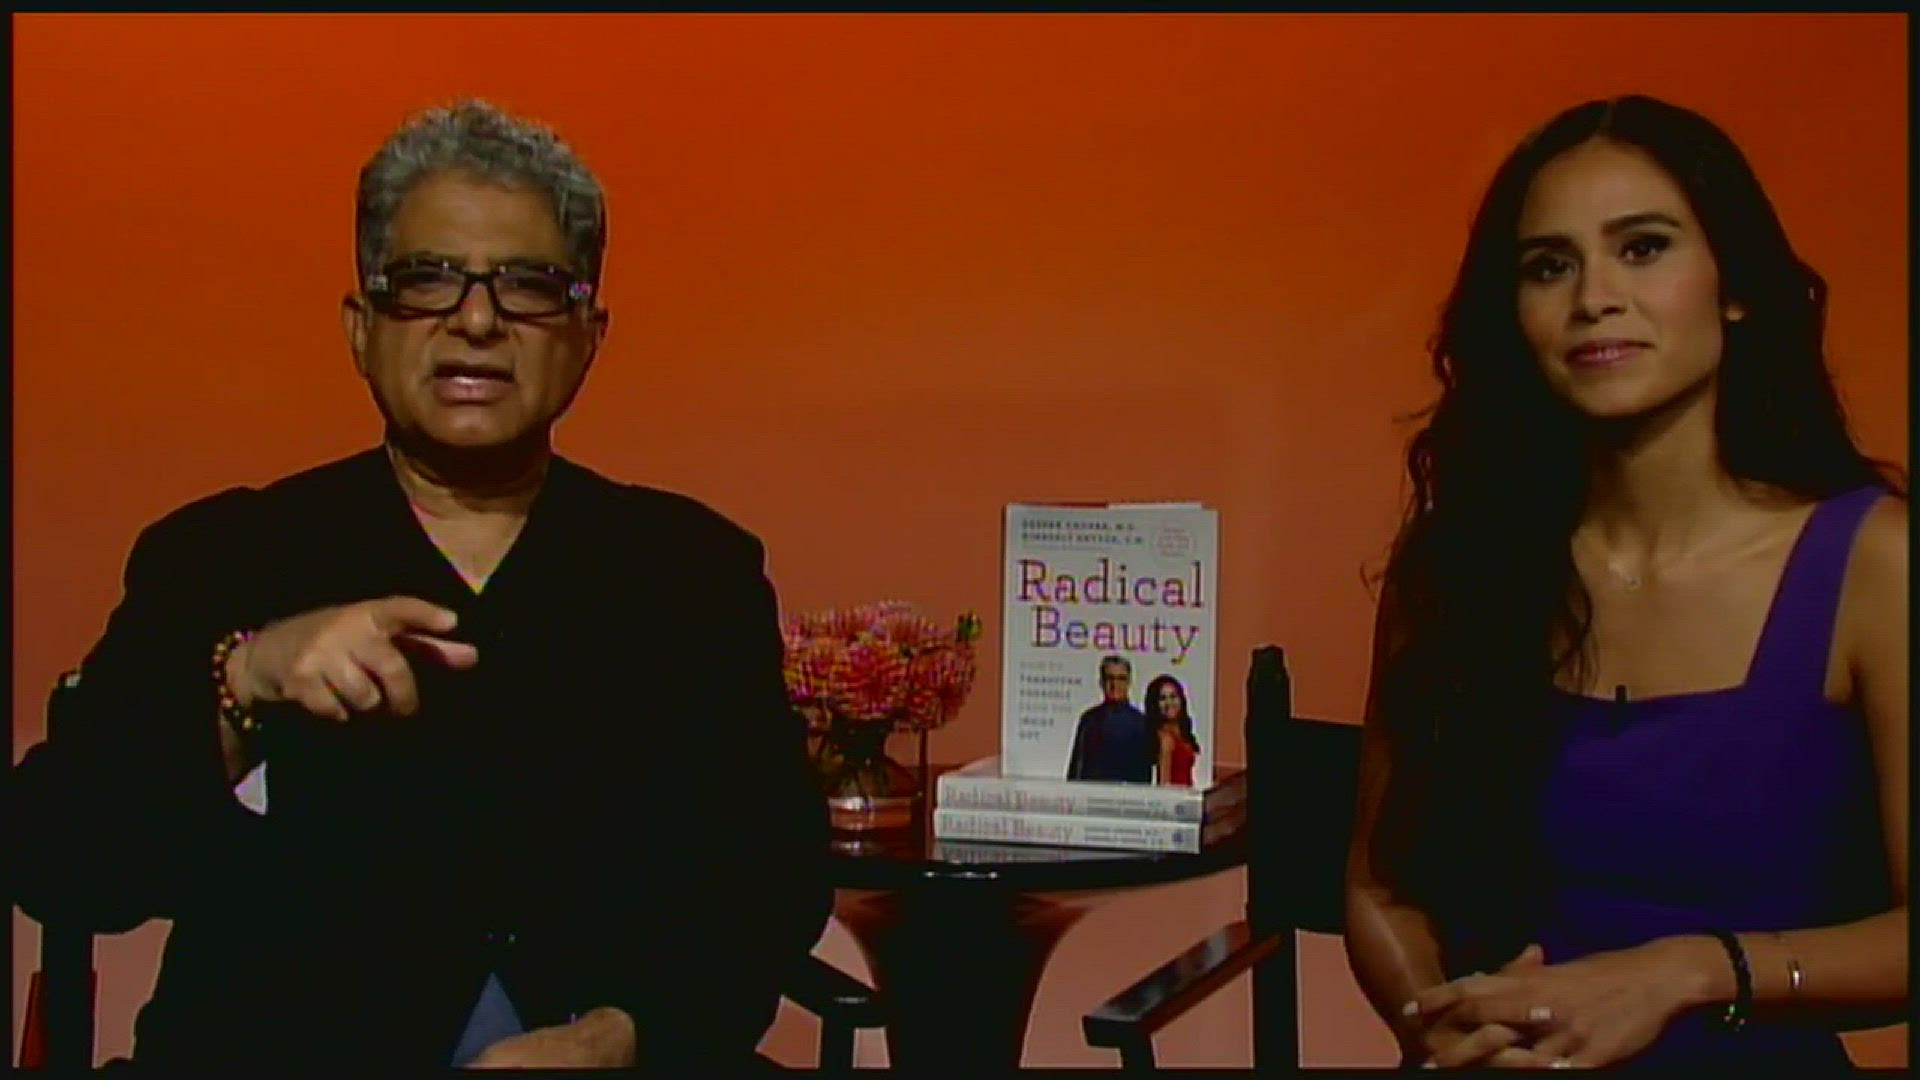 Author Dr. Deepak Chopra and Celebrity Nutritionist Kimberly Snyder share the 6 pillars for healthy living.